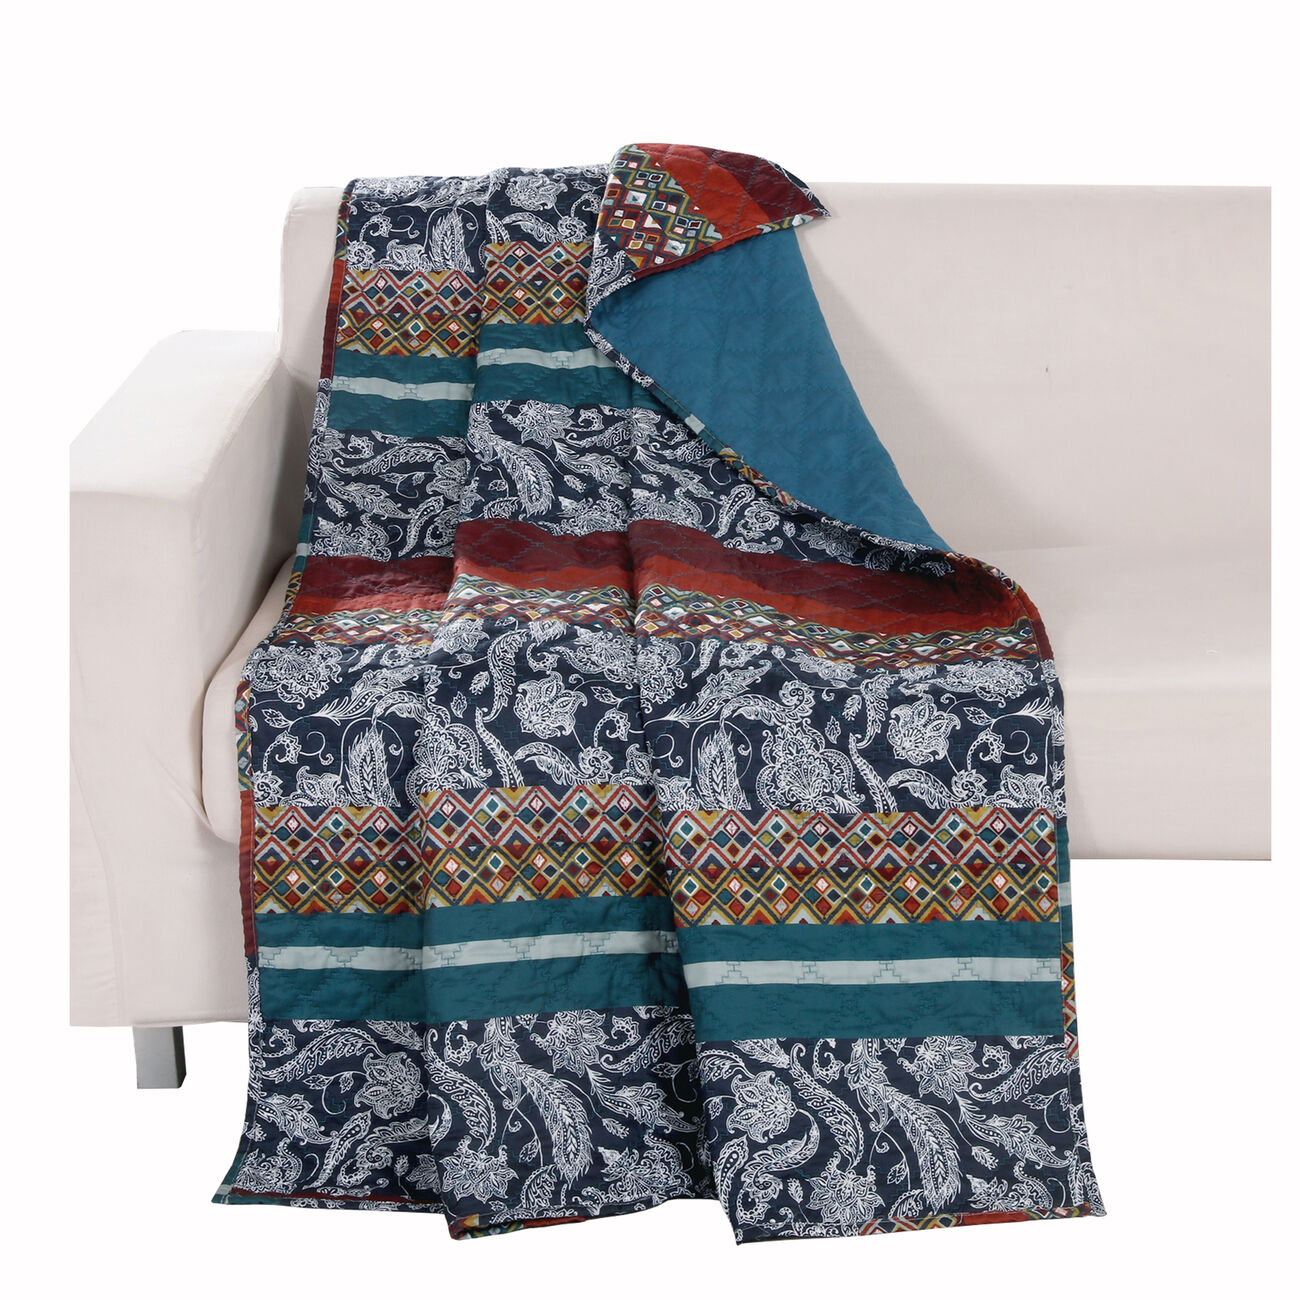 60 x 50 Inches Polyester Throw Blanket with Paisley Print, Multicolor